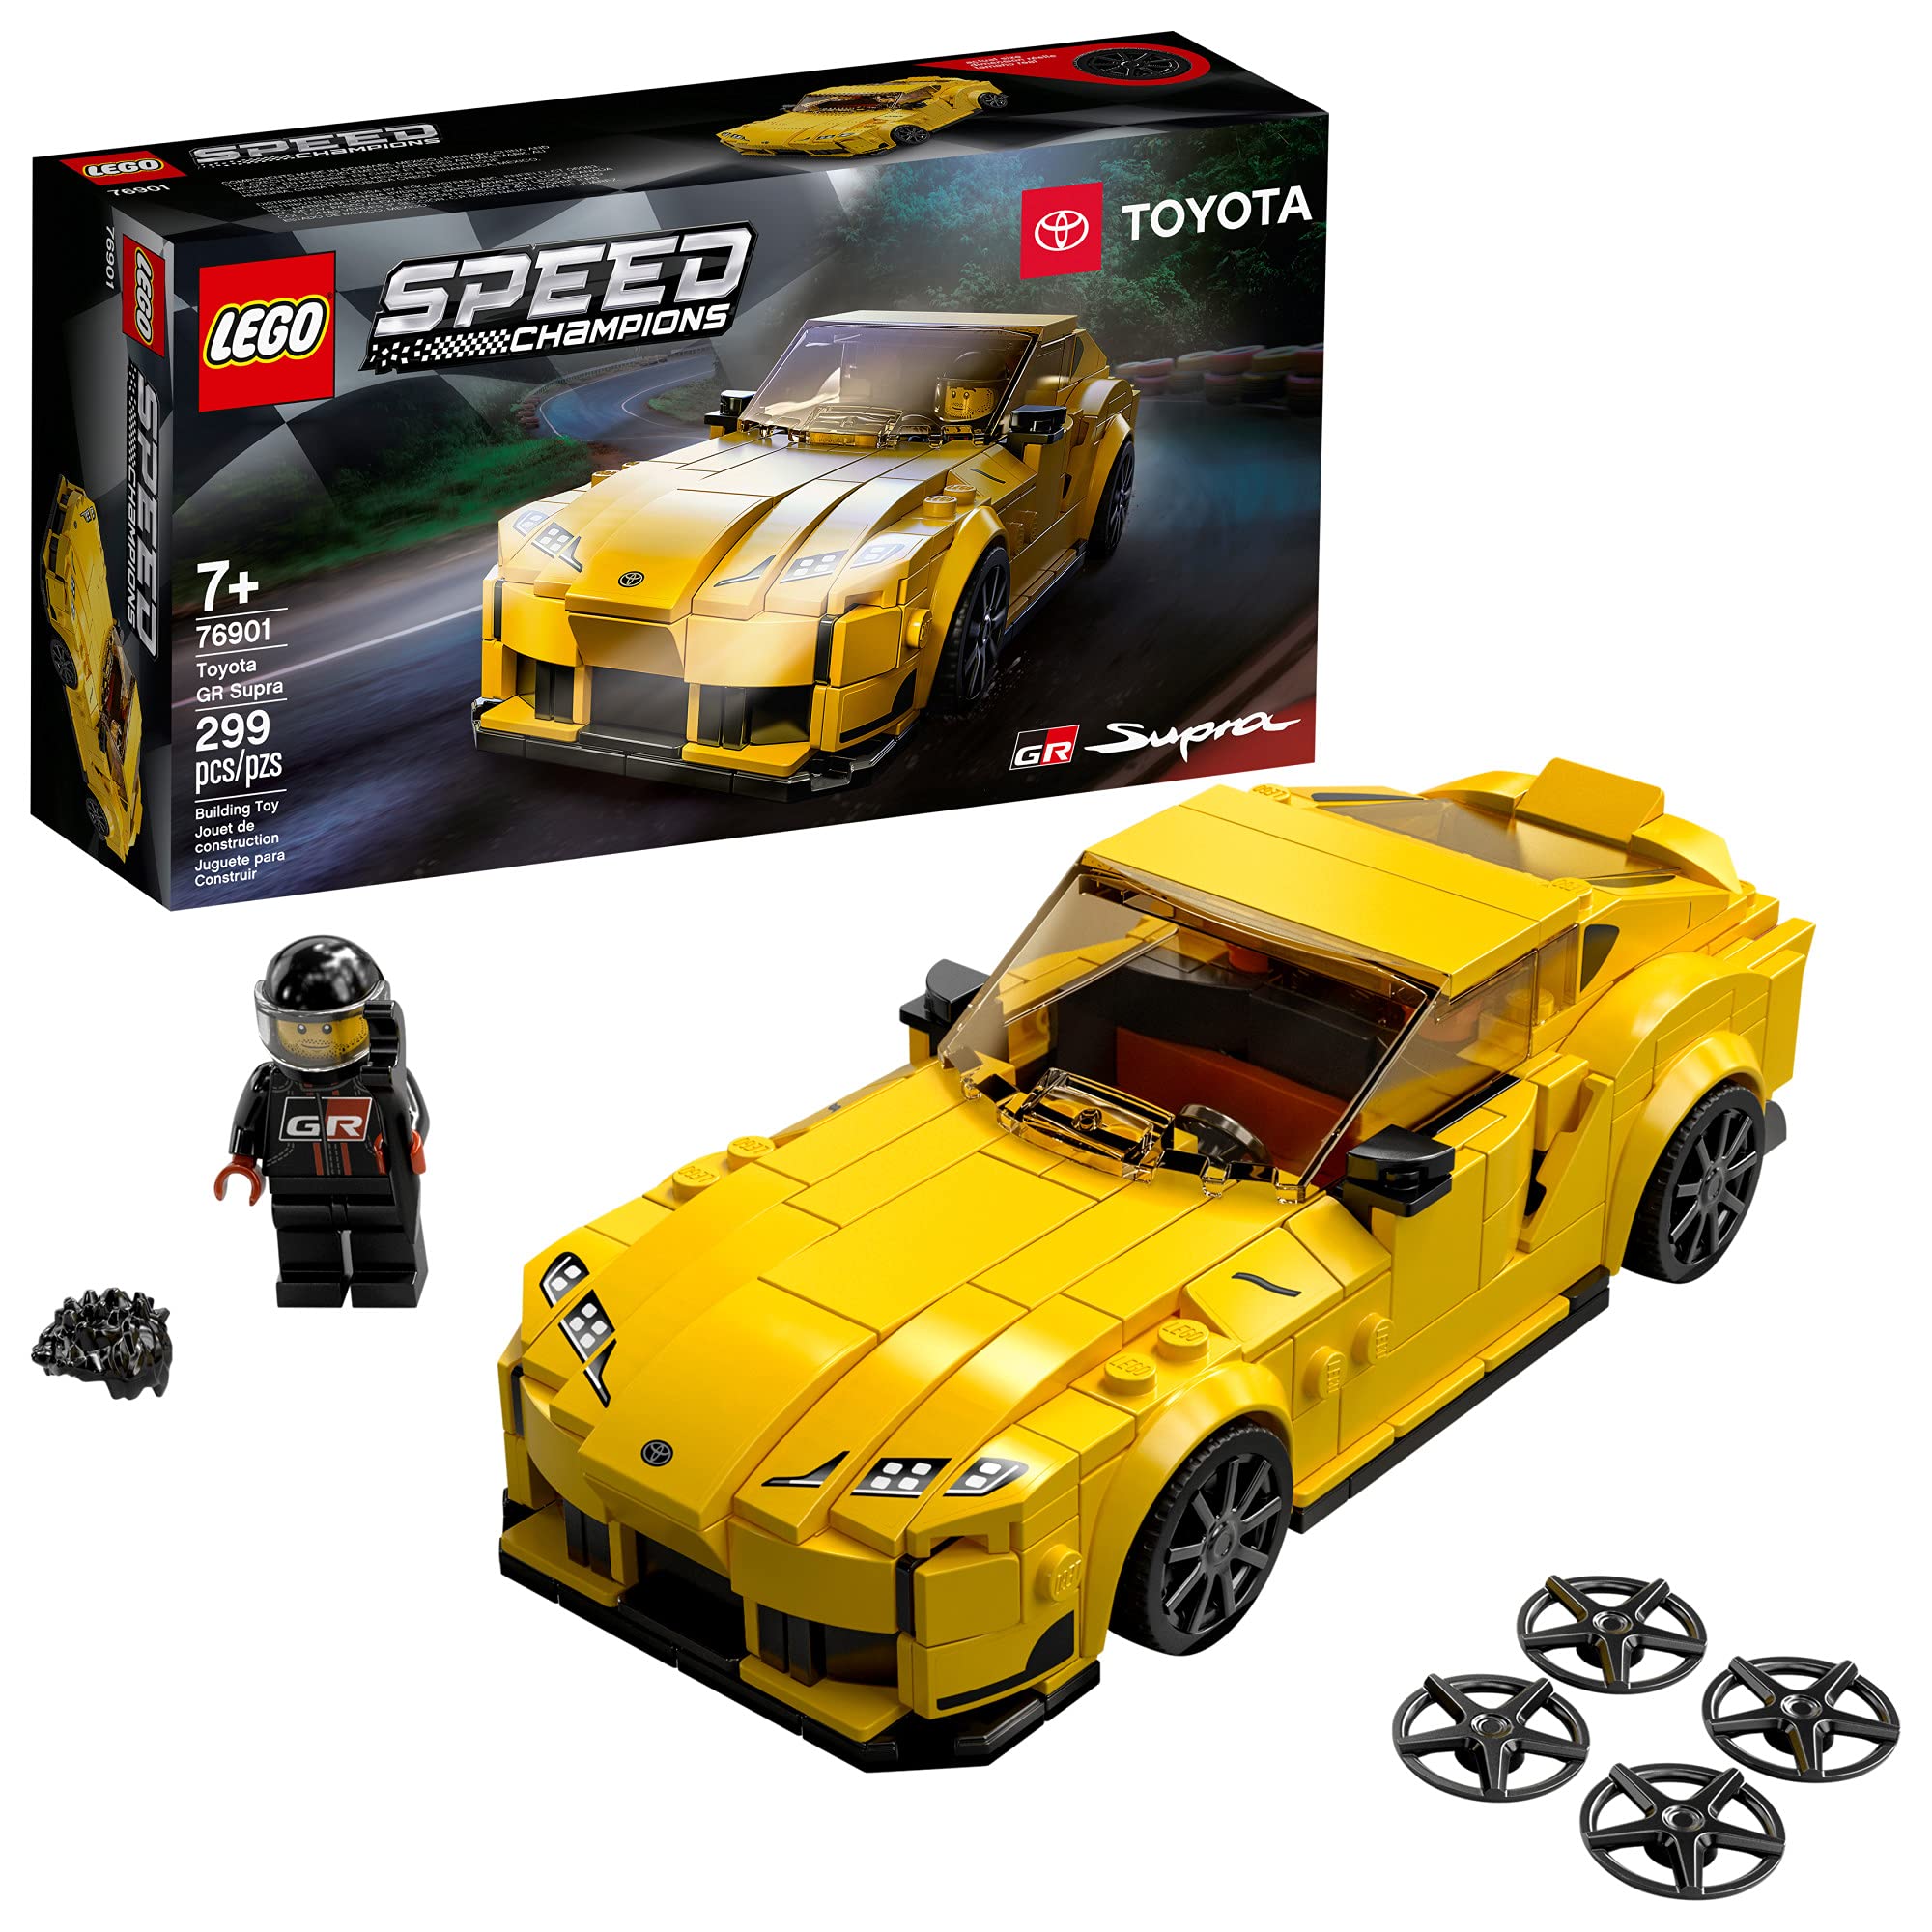 LEGO Speed Champions Toyota GR Supra 76901 Toy Car Building Toy; Racing Car Toy for Kids (299 Pieces) (Like New, Open Box)